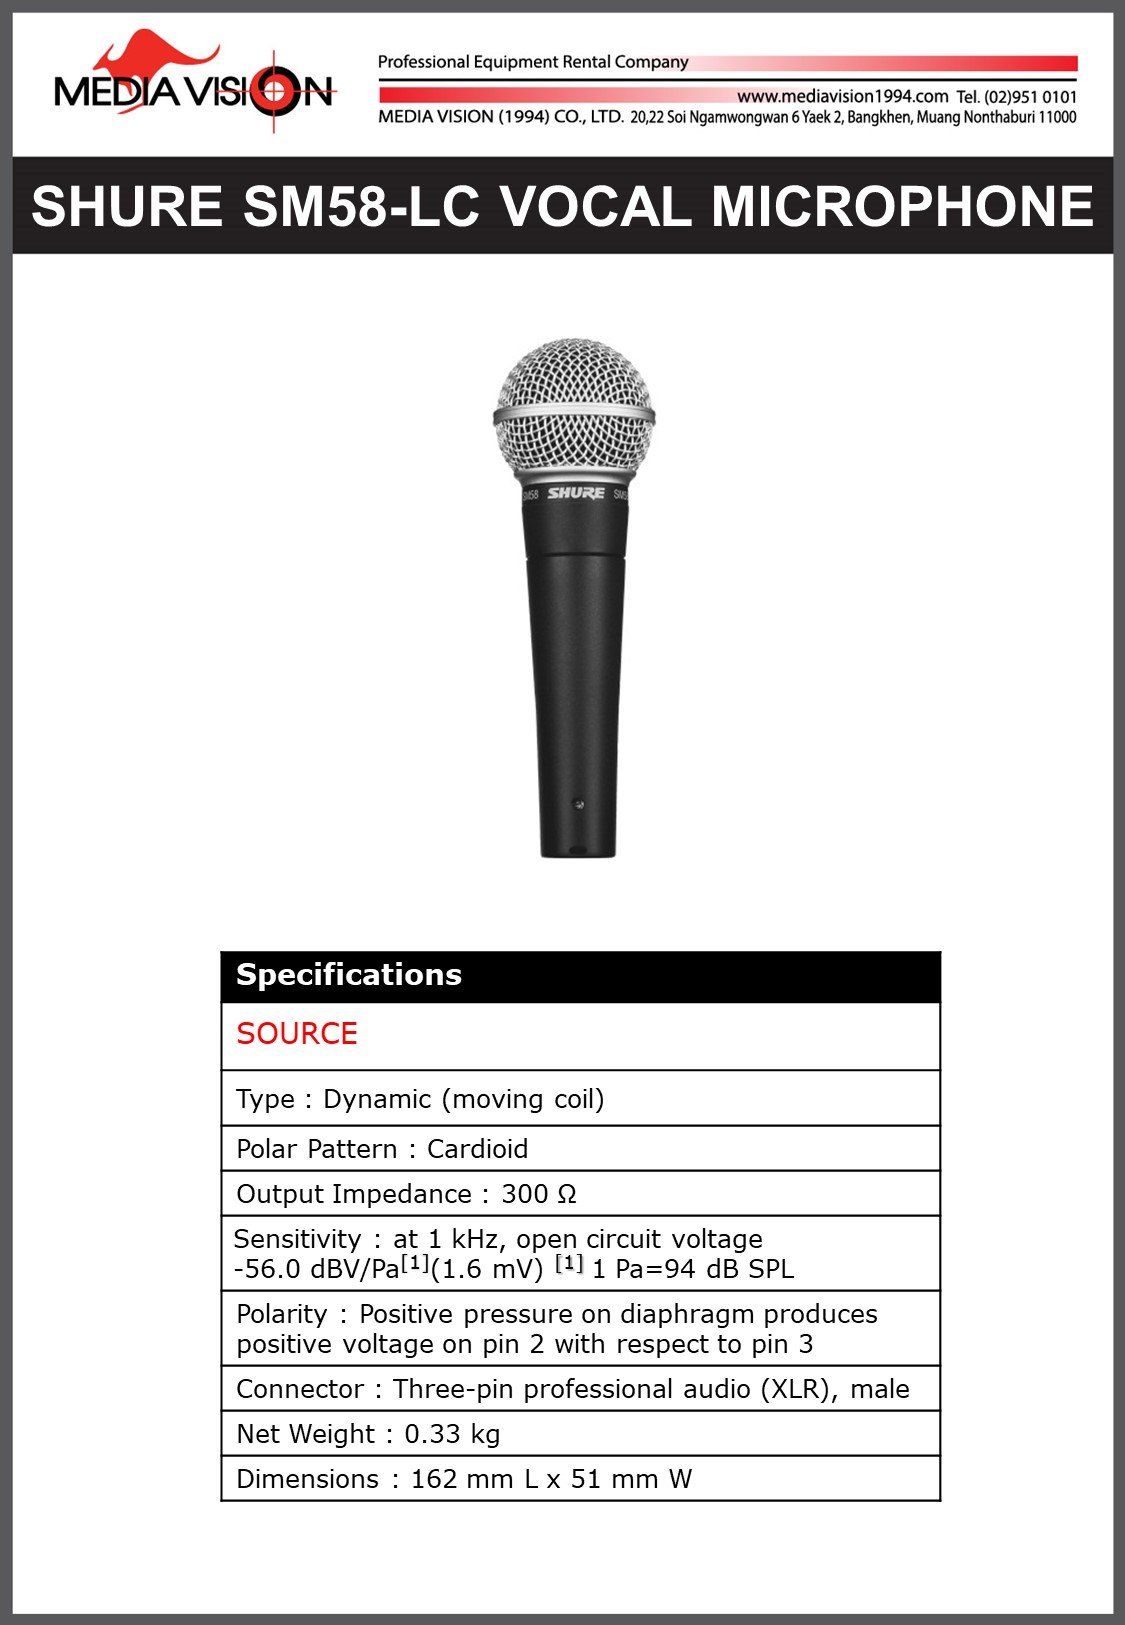 SHURE SM58-LC VOCAL MICROPHONE